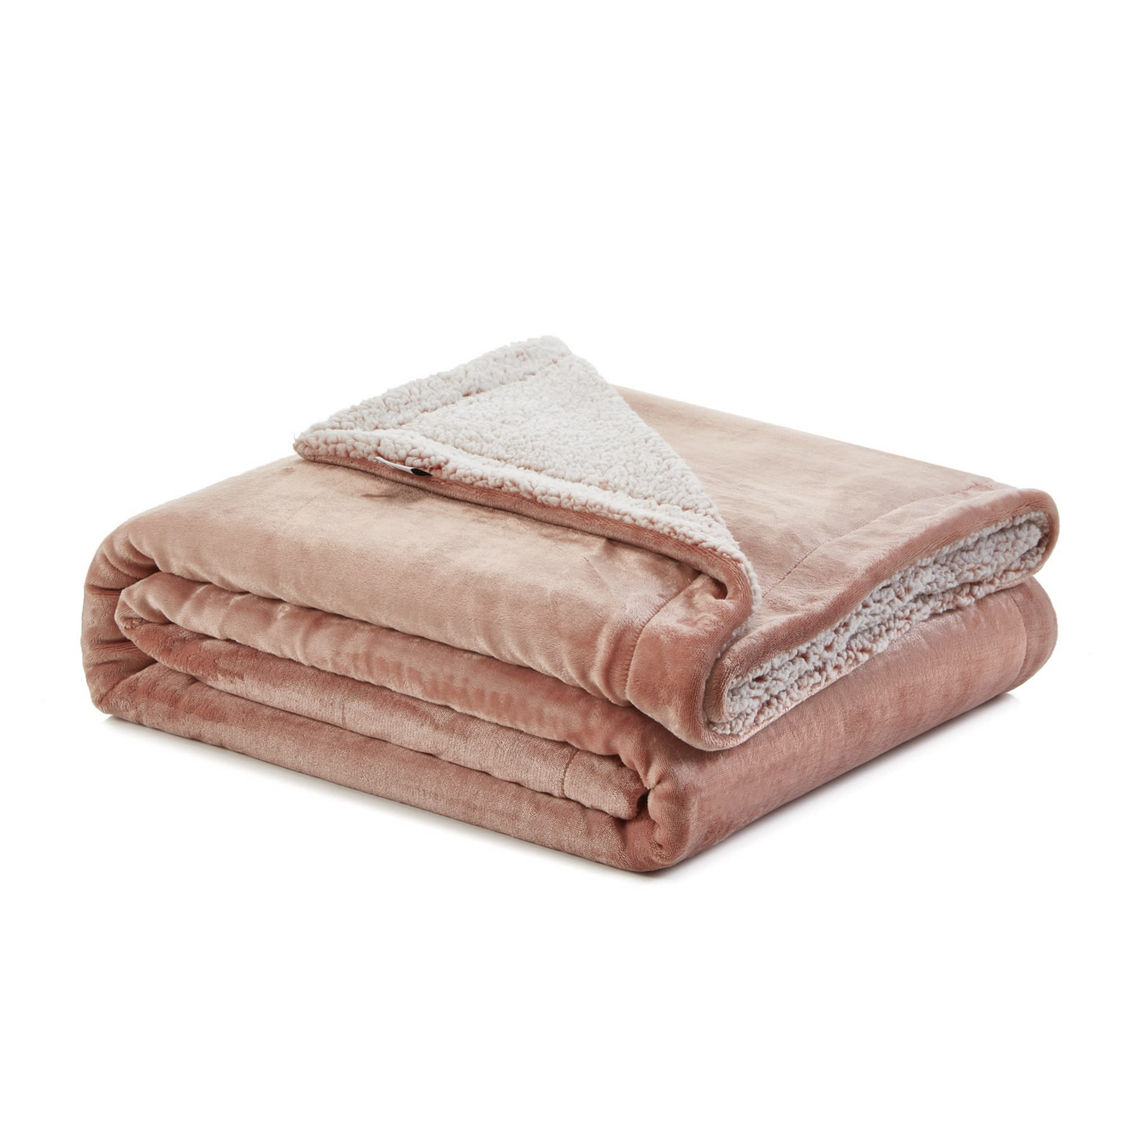 Cozy Tyme Urima Flannel Reversible Heathered Sherpa Throw Blanket - Image 3 of 5